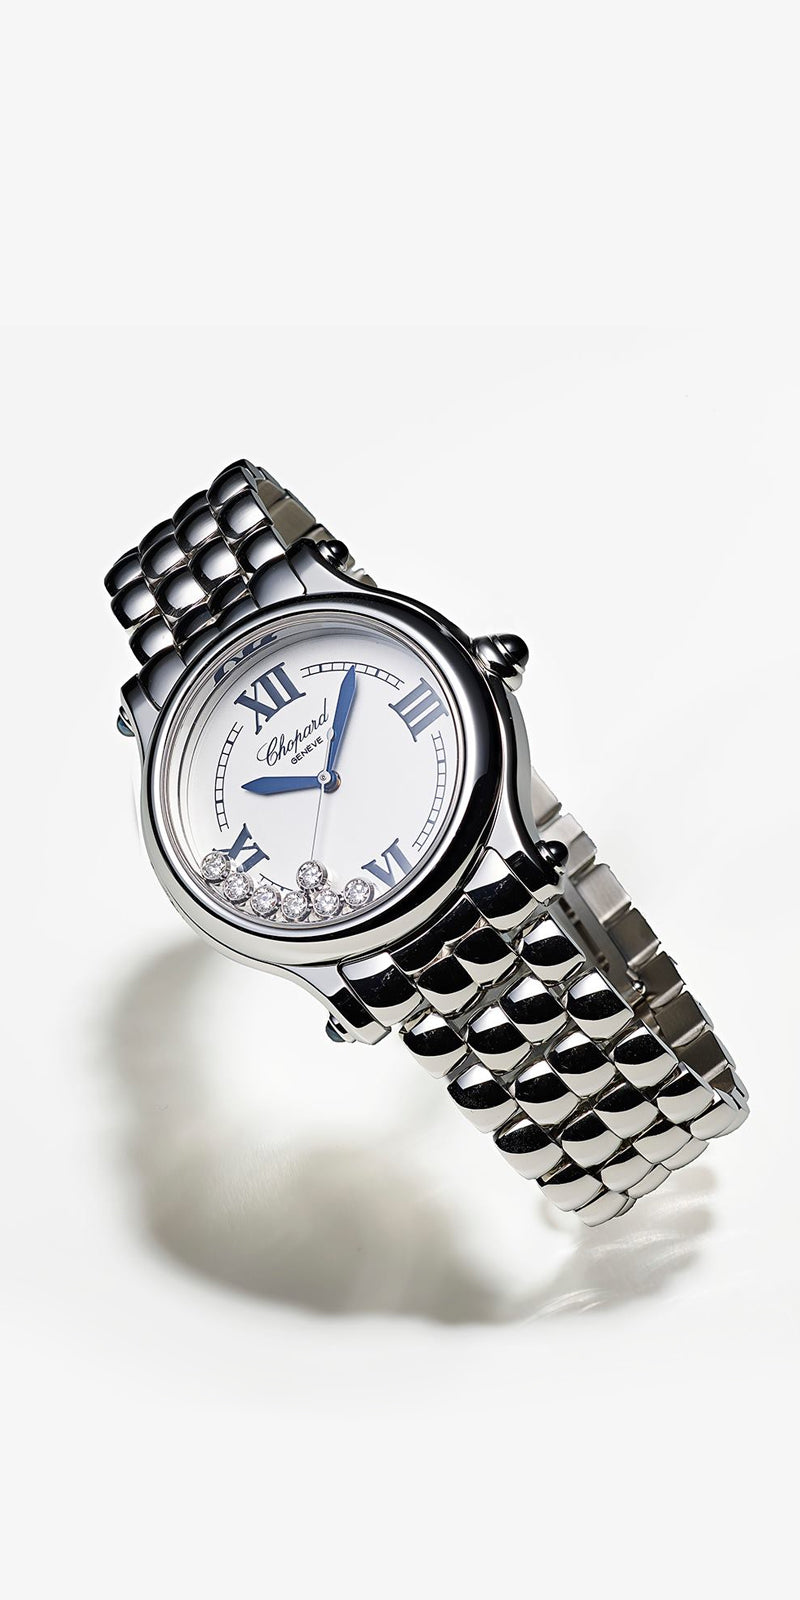 Chopard Geneve stainless steel case with 7 diamonds 